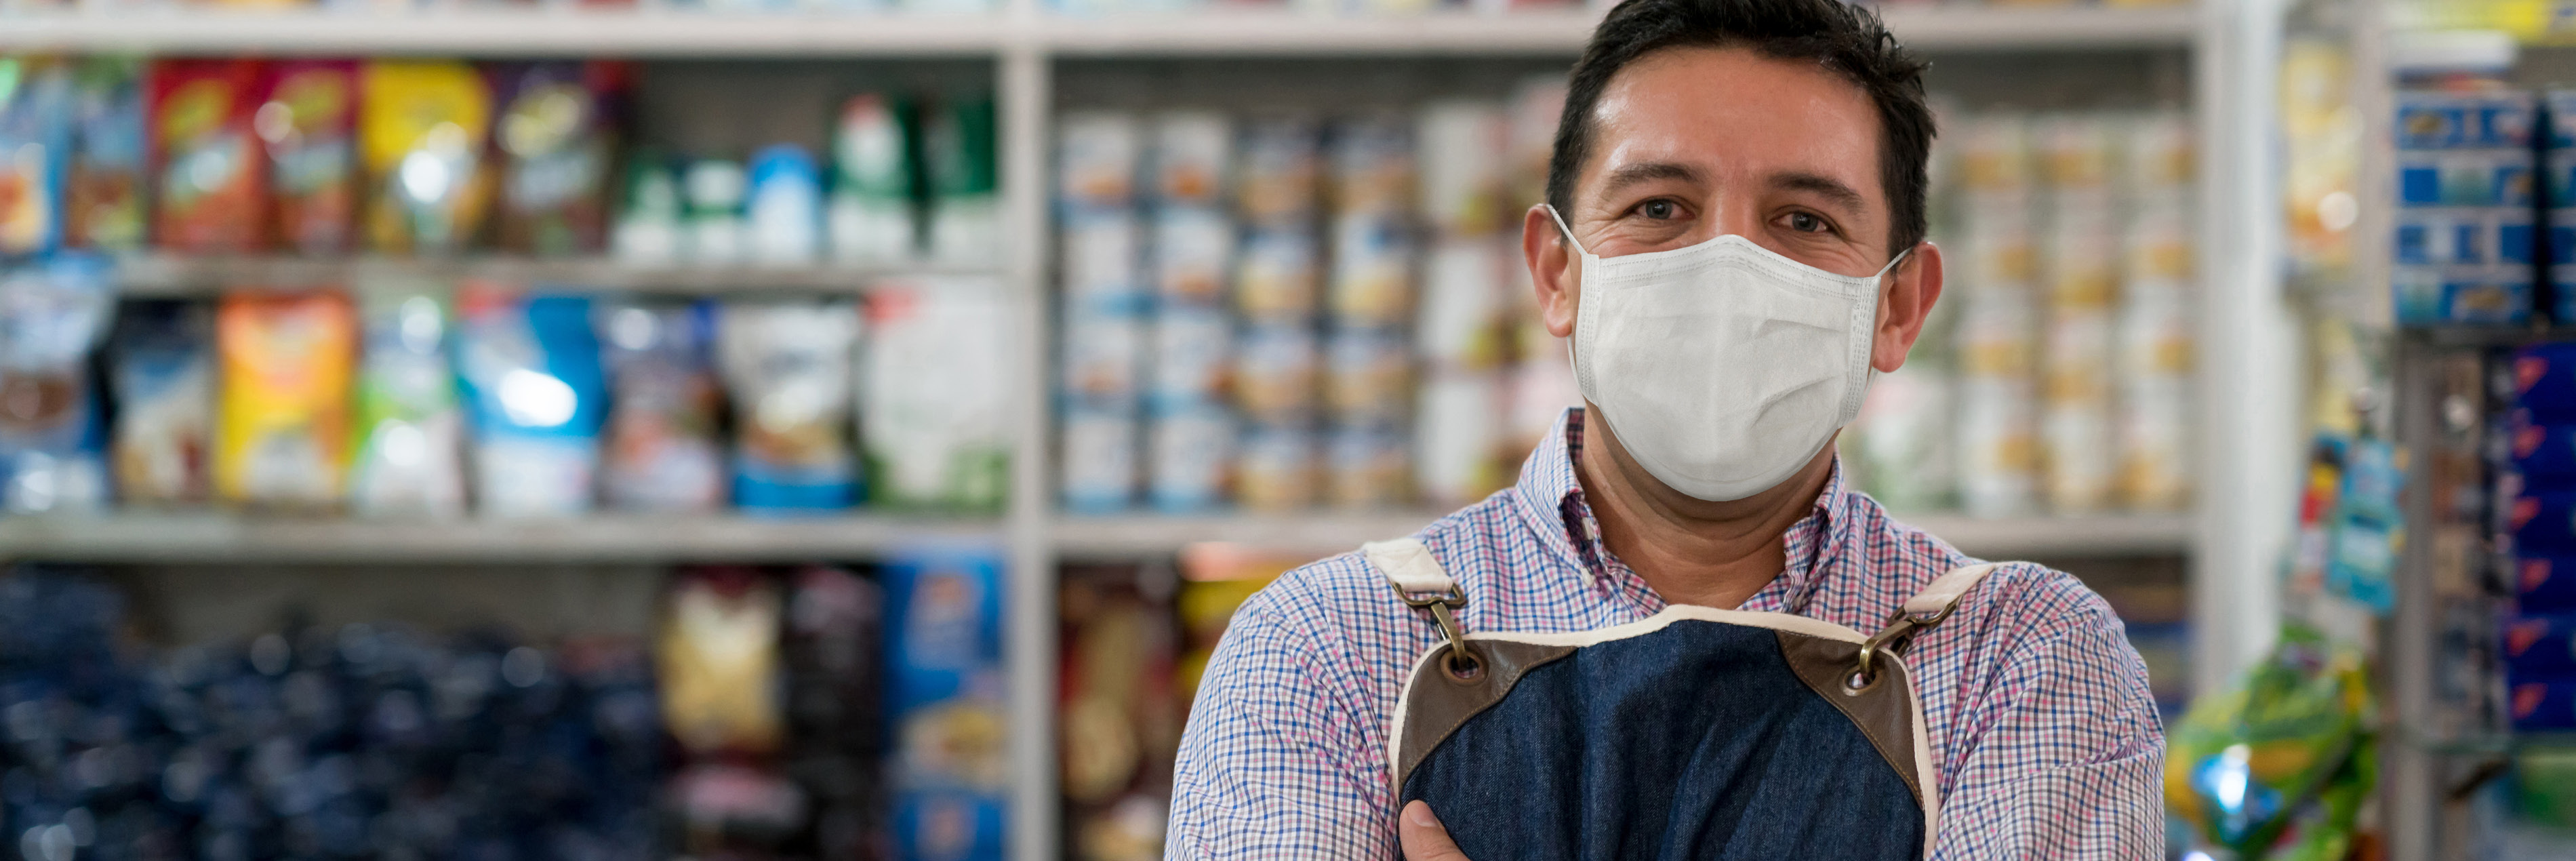 Man with face mask working at store